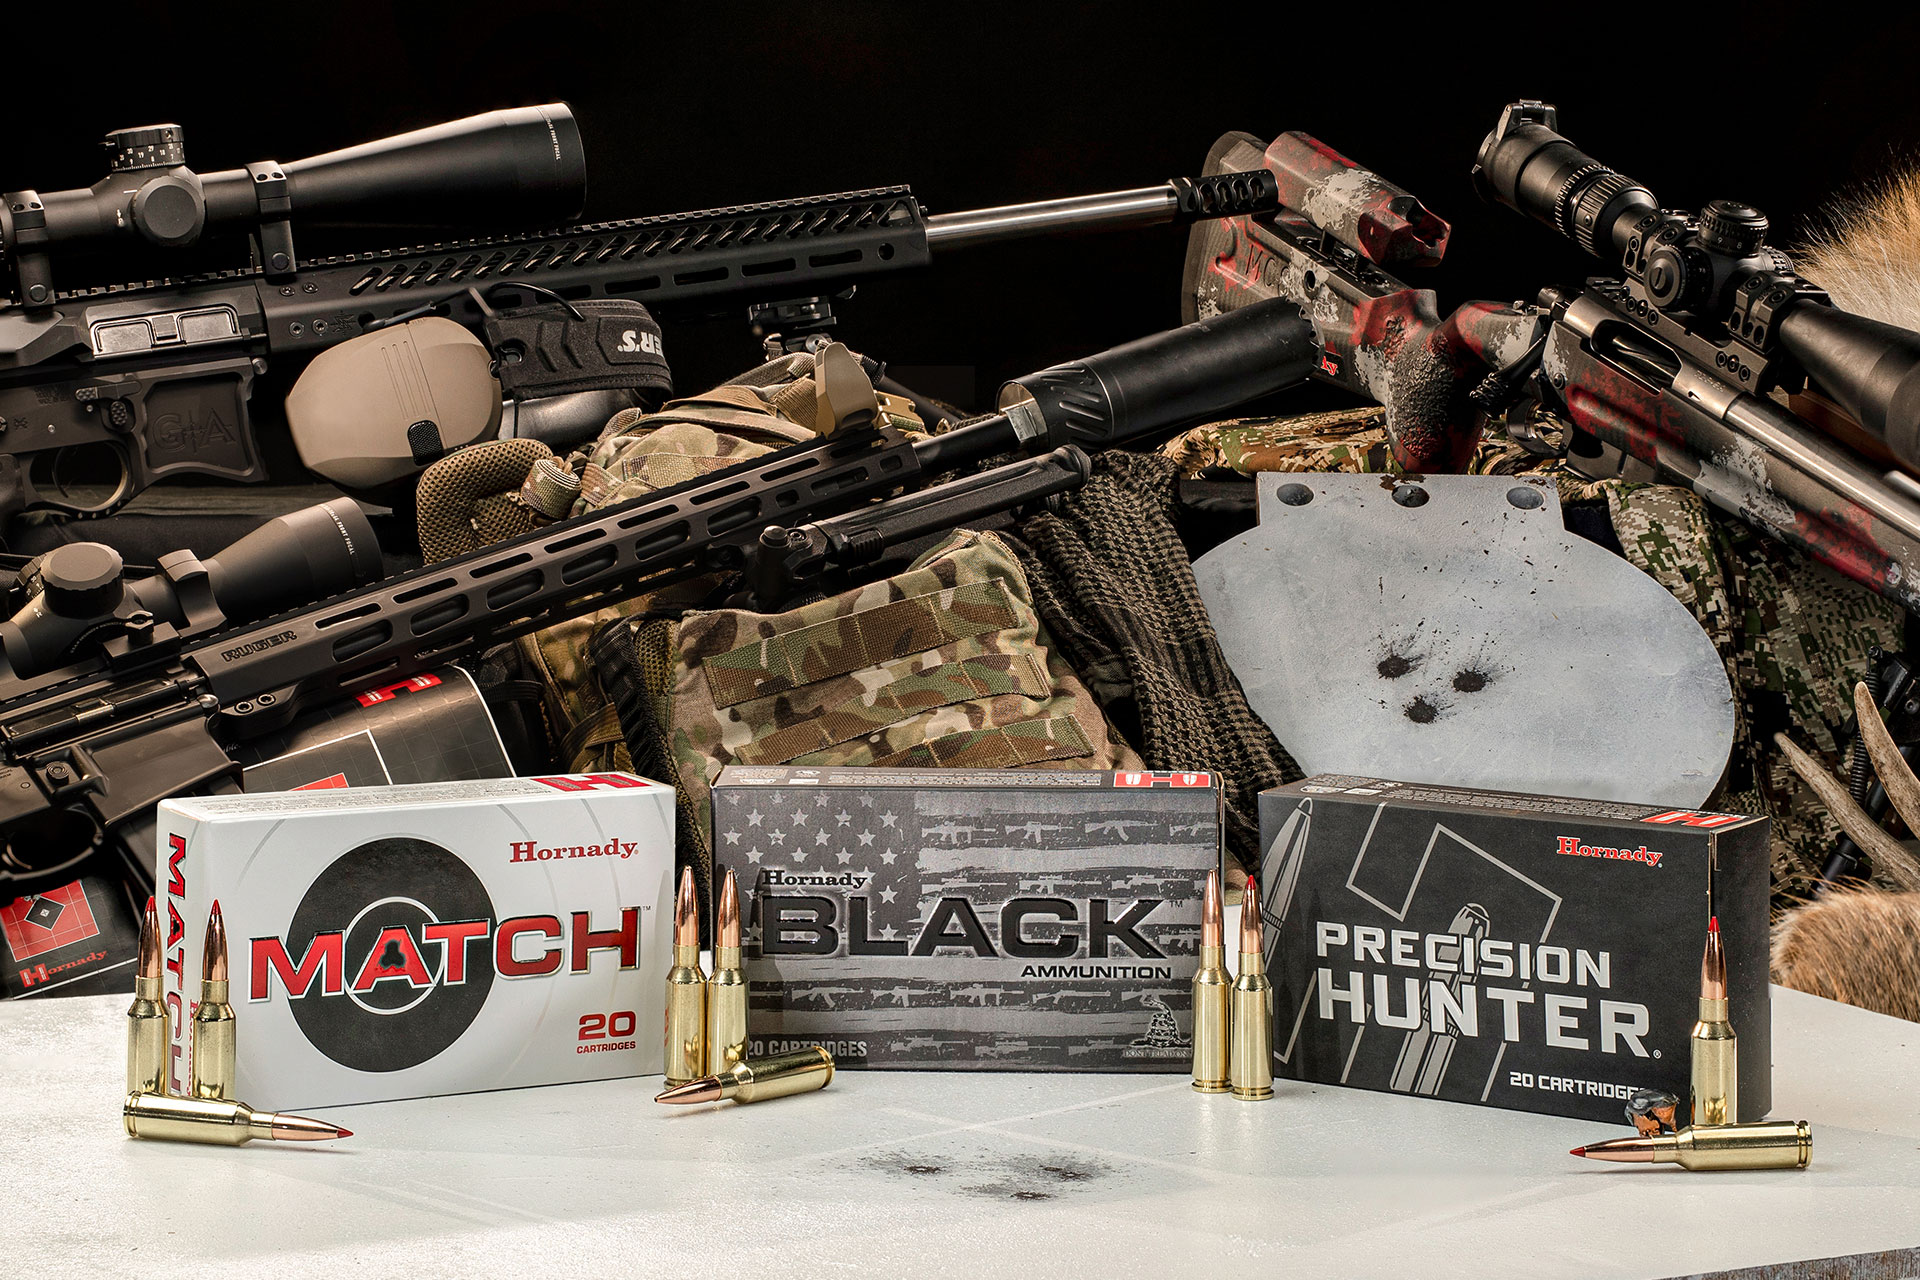 HOWA's Mini Action Rifles Now Come in 6mm ARC!